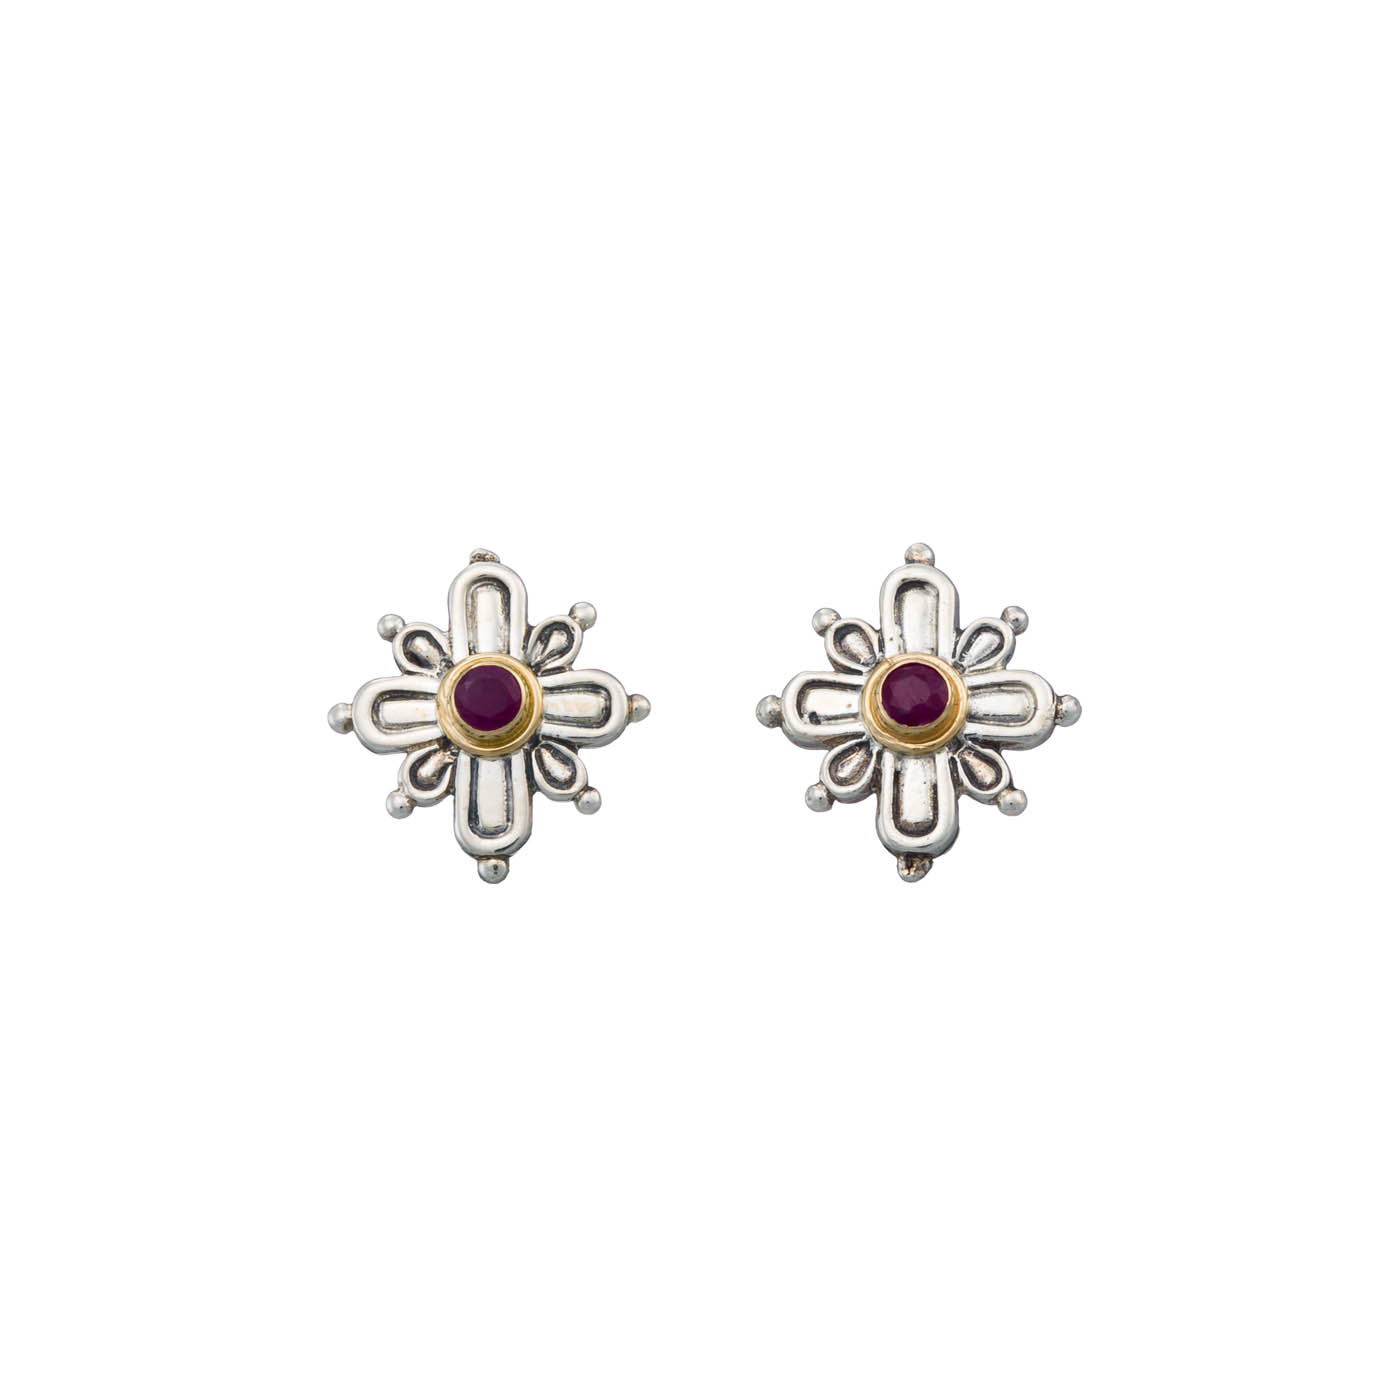 Cross Stud Earrings in 18K Gold and Sterling Silver with ruby